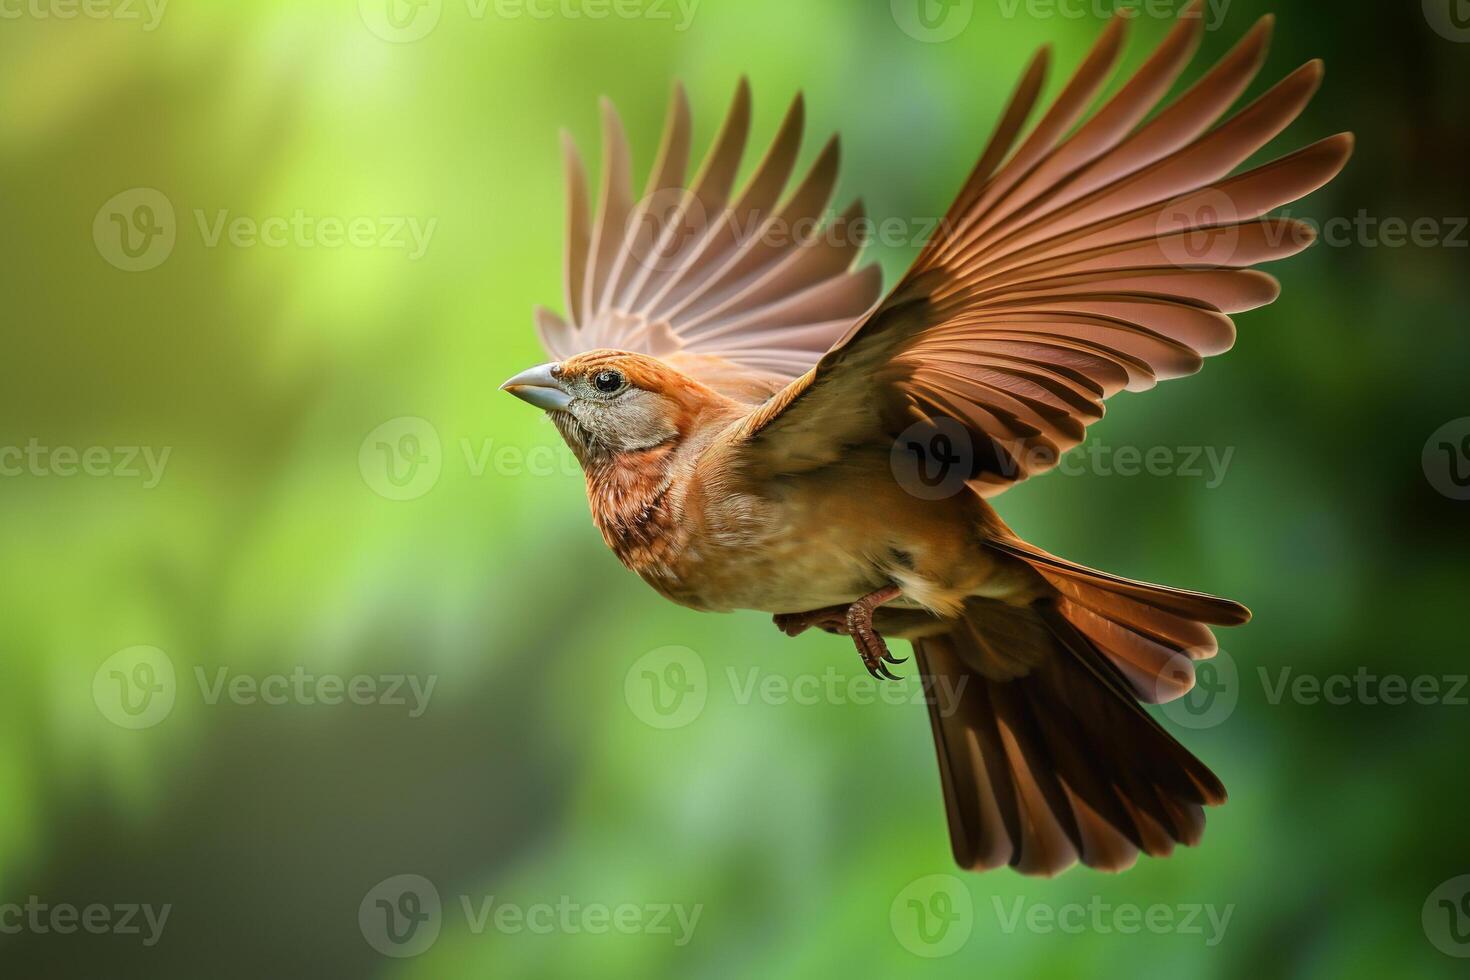 majestic bird in flight against a blurred background. photo